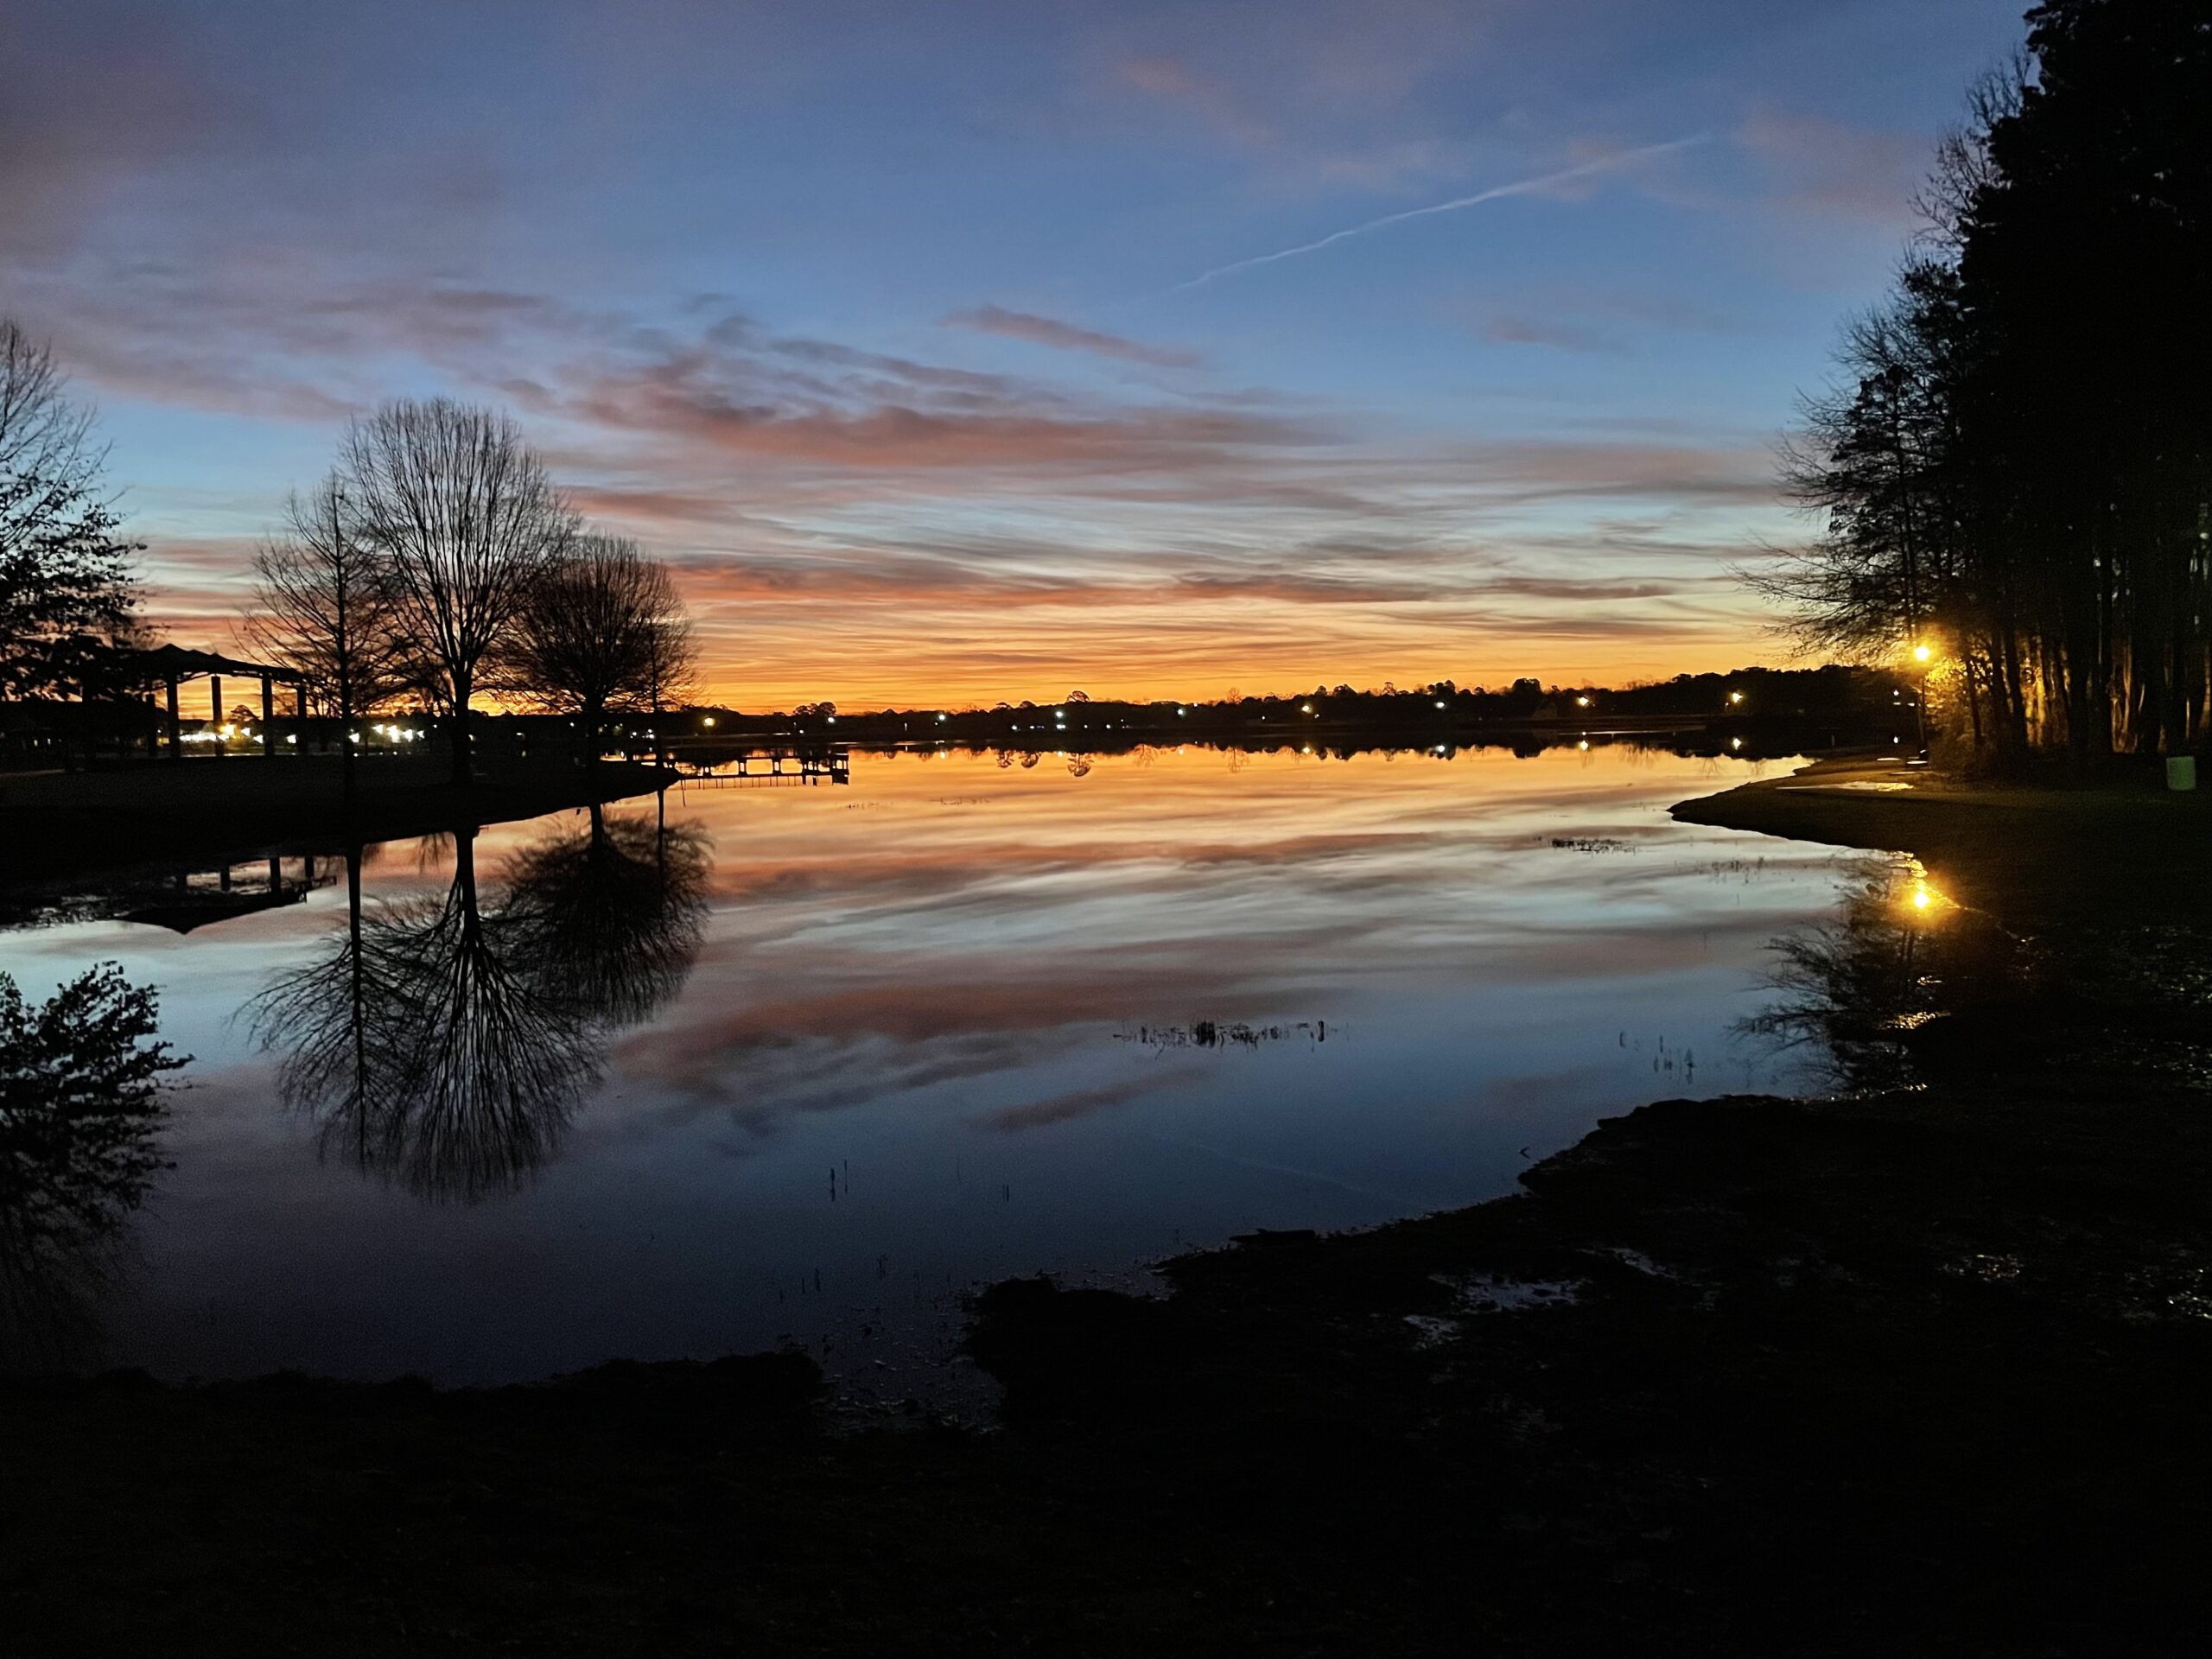 Early light breaks the horizon spreading orange color into a dark blue sky and reflecting in a body of water below. Silhouettes of trees line the shoreline. Street lamps can be seen across the lake.